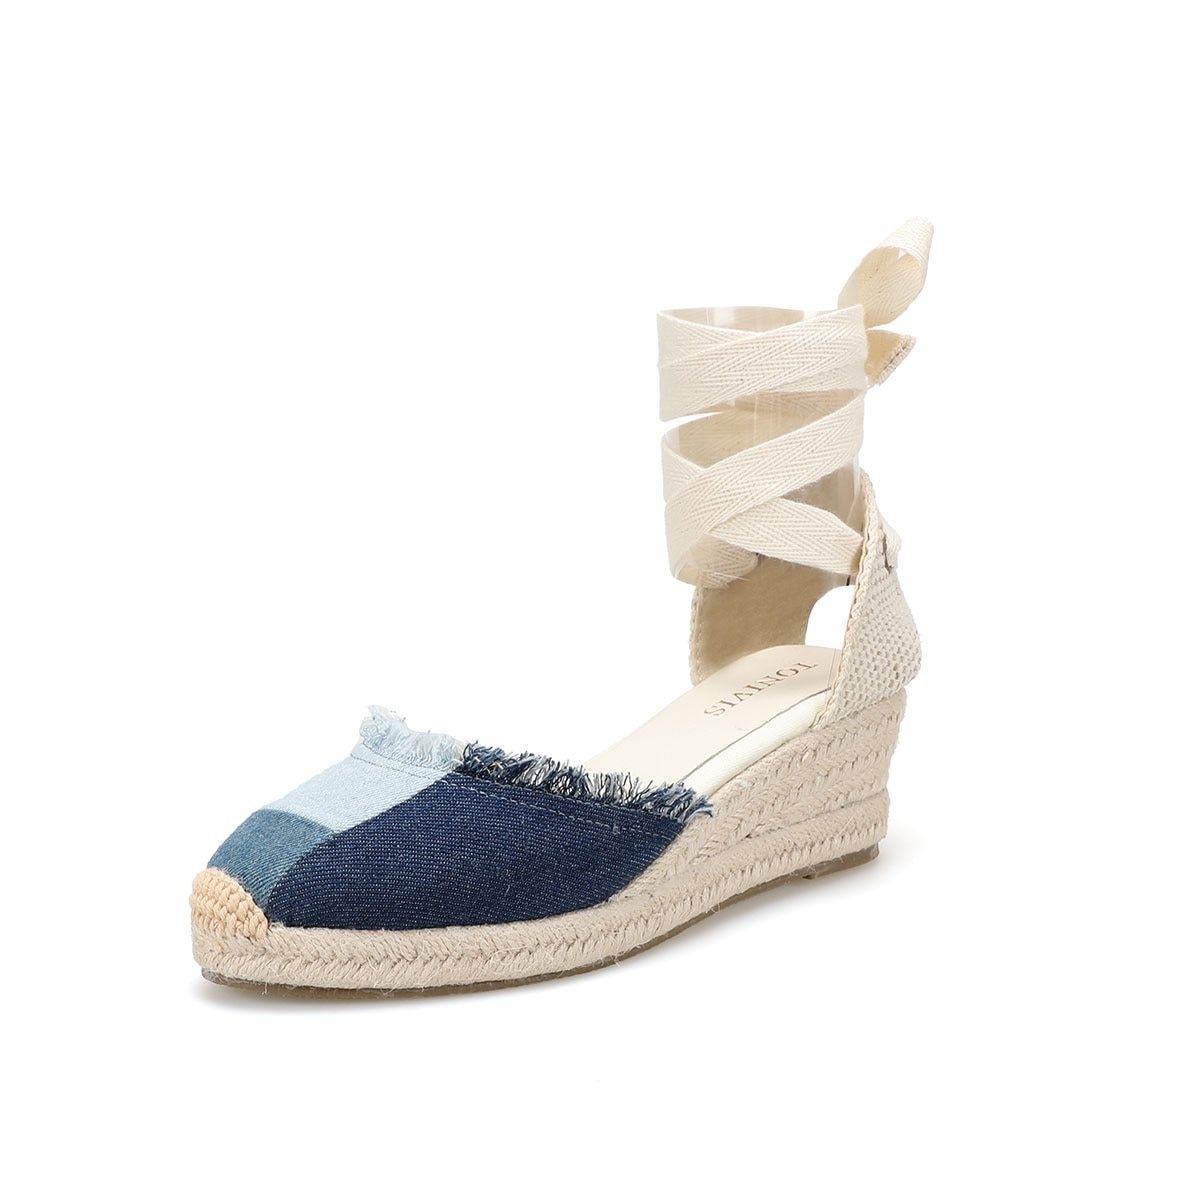 Wedge Low Heels Sandals For Women 2022 Promotion Sale Denim 0-3cm Casual Canvas Covered Sapato Feminino Sandalias Mujer